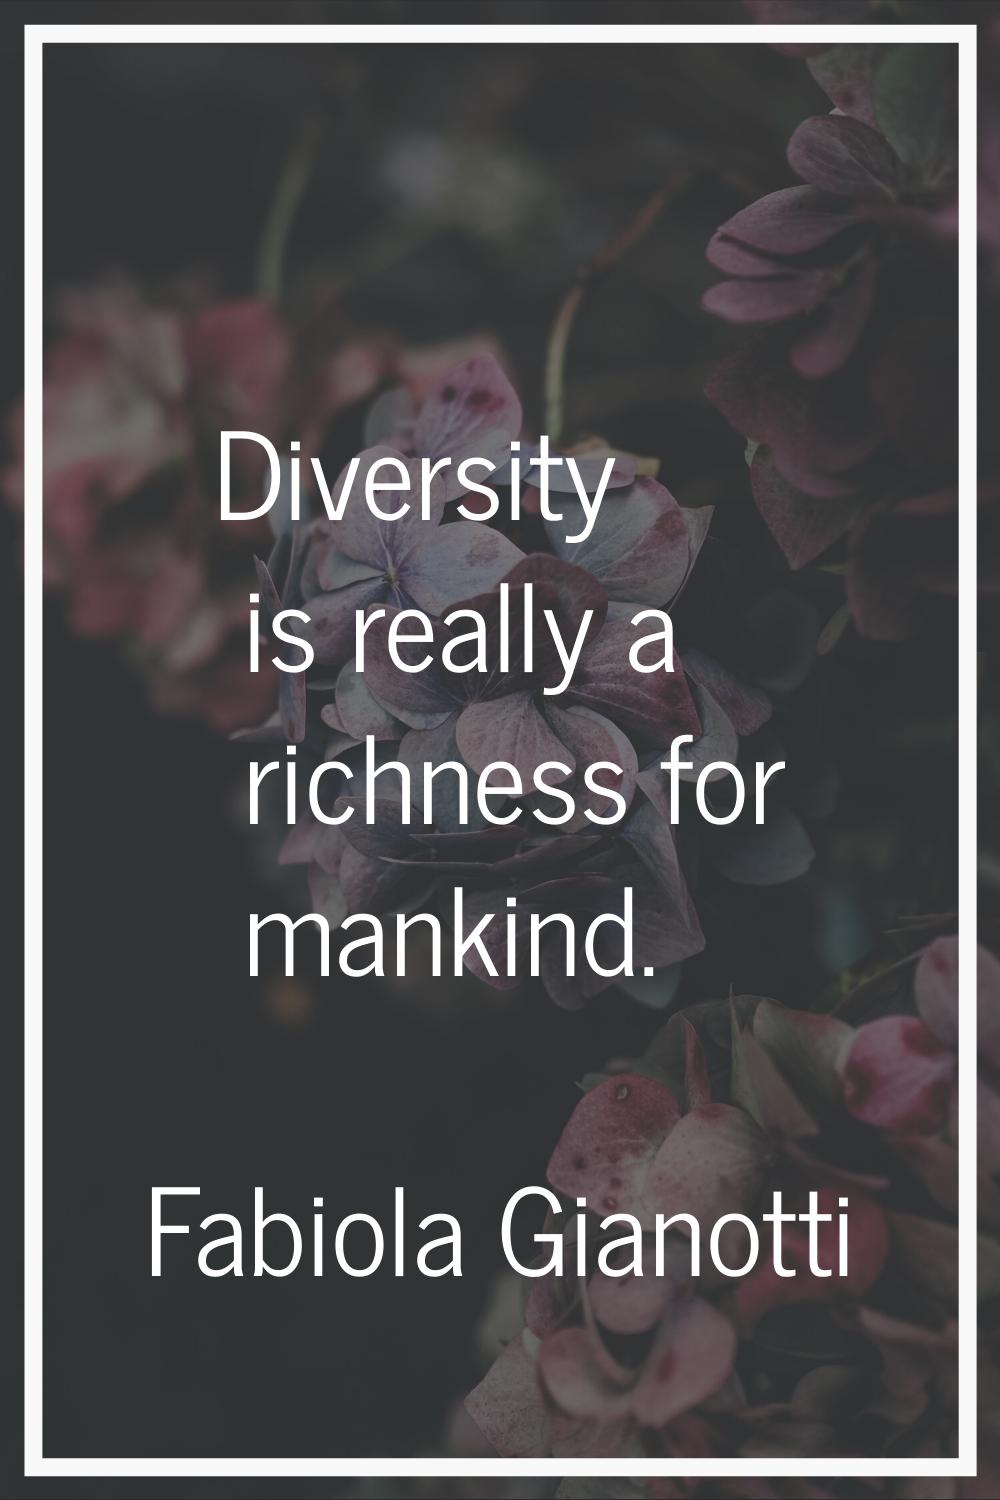 Diversity is really a richness for mankind.